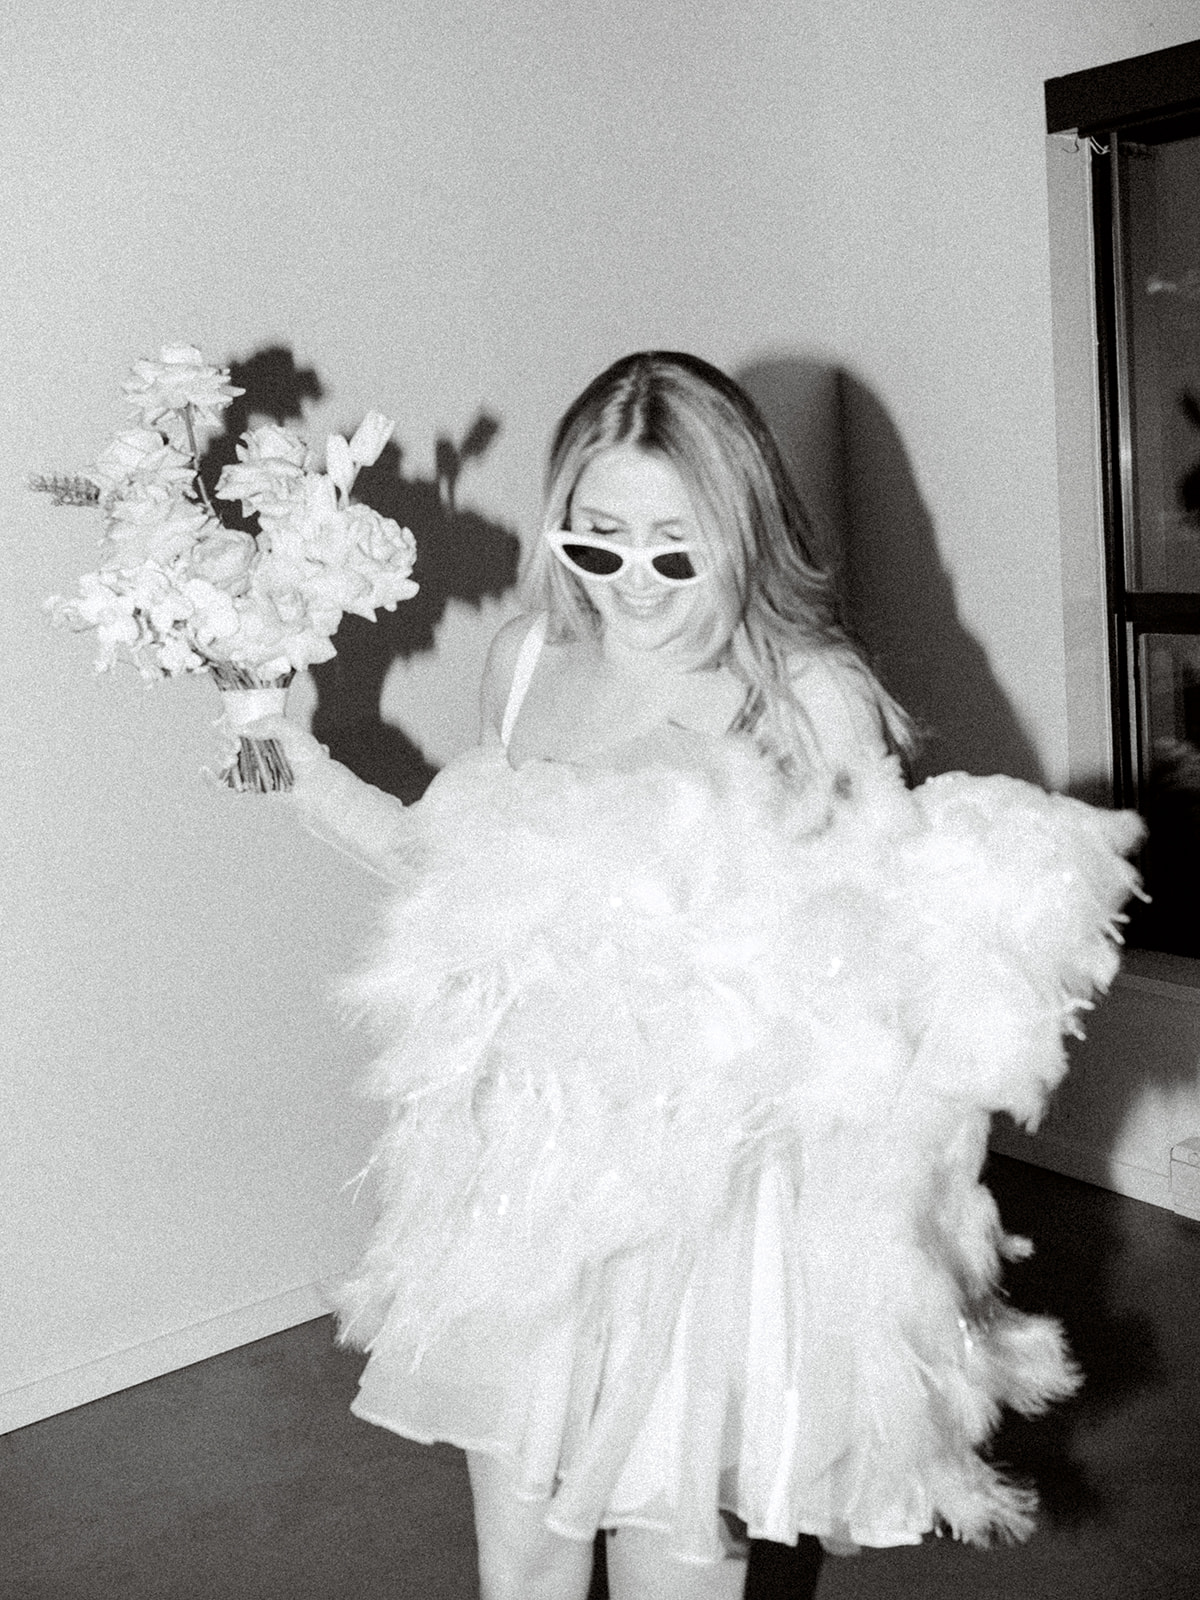 Black and white bridal portrait giving off a vintage look, cheeky bride holding bouquet wearing a white feather mini dress and white retro sunglasses for this modern photoshoot, black and white photography ideas for wedding